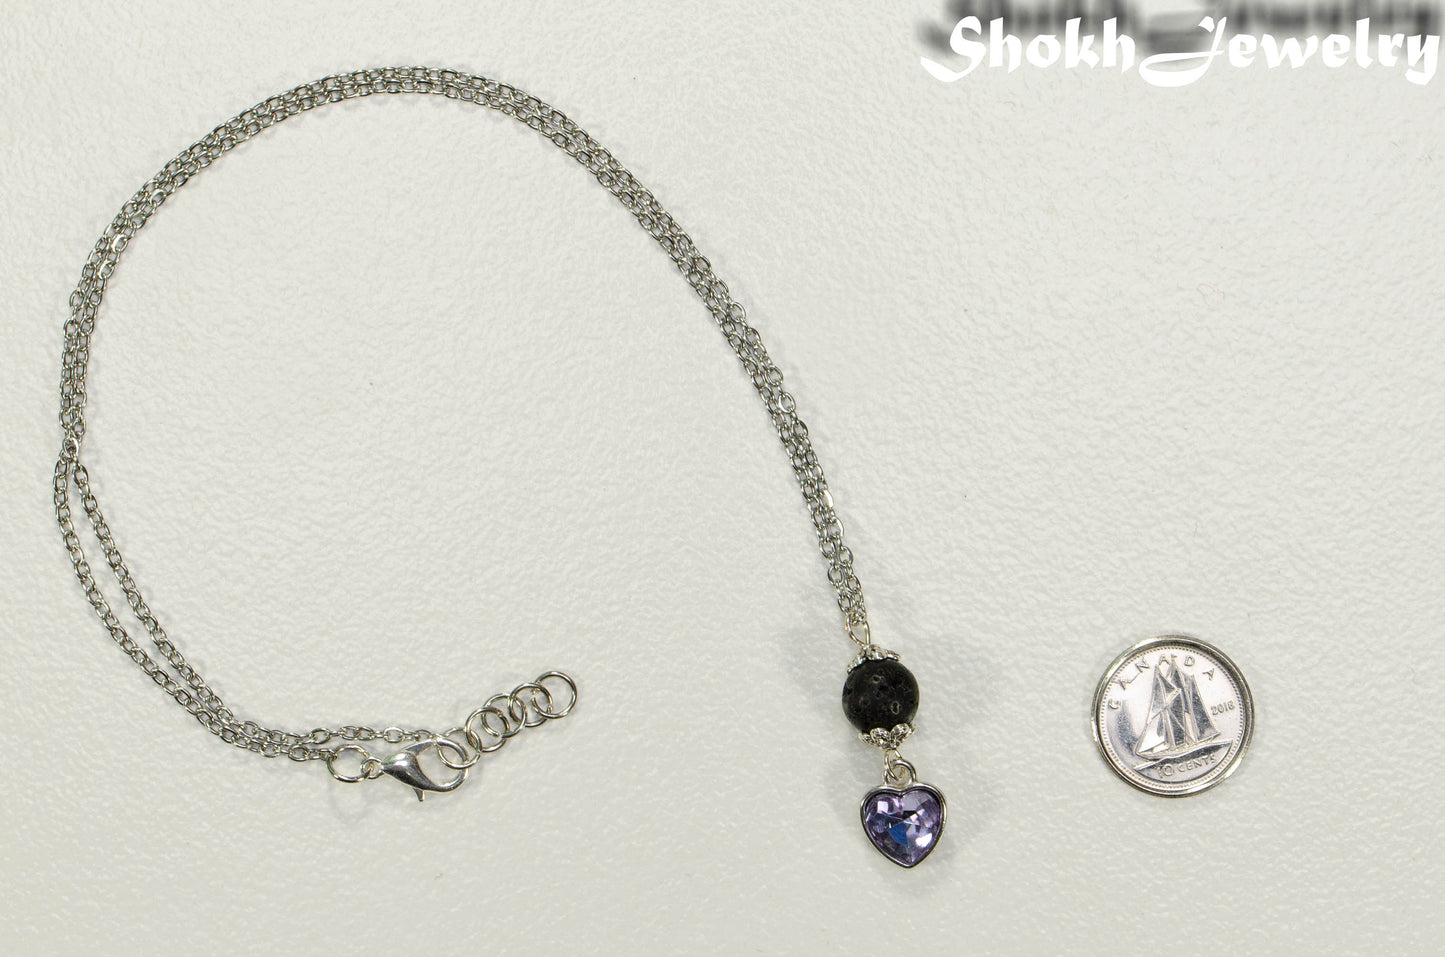 Lava Rock and Heart Shaped June Birthstone Choker Necklace beside a dime.